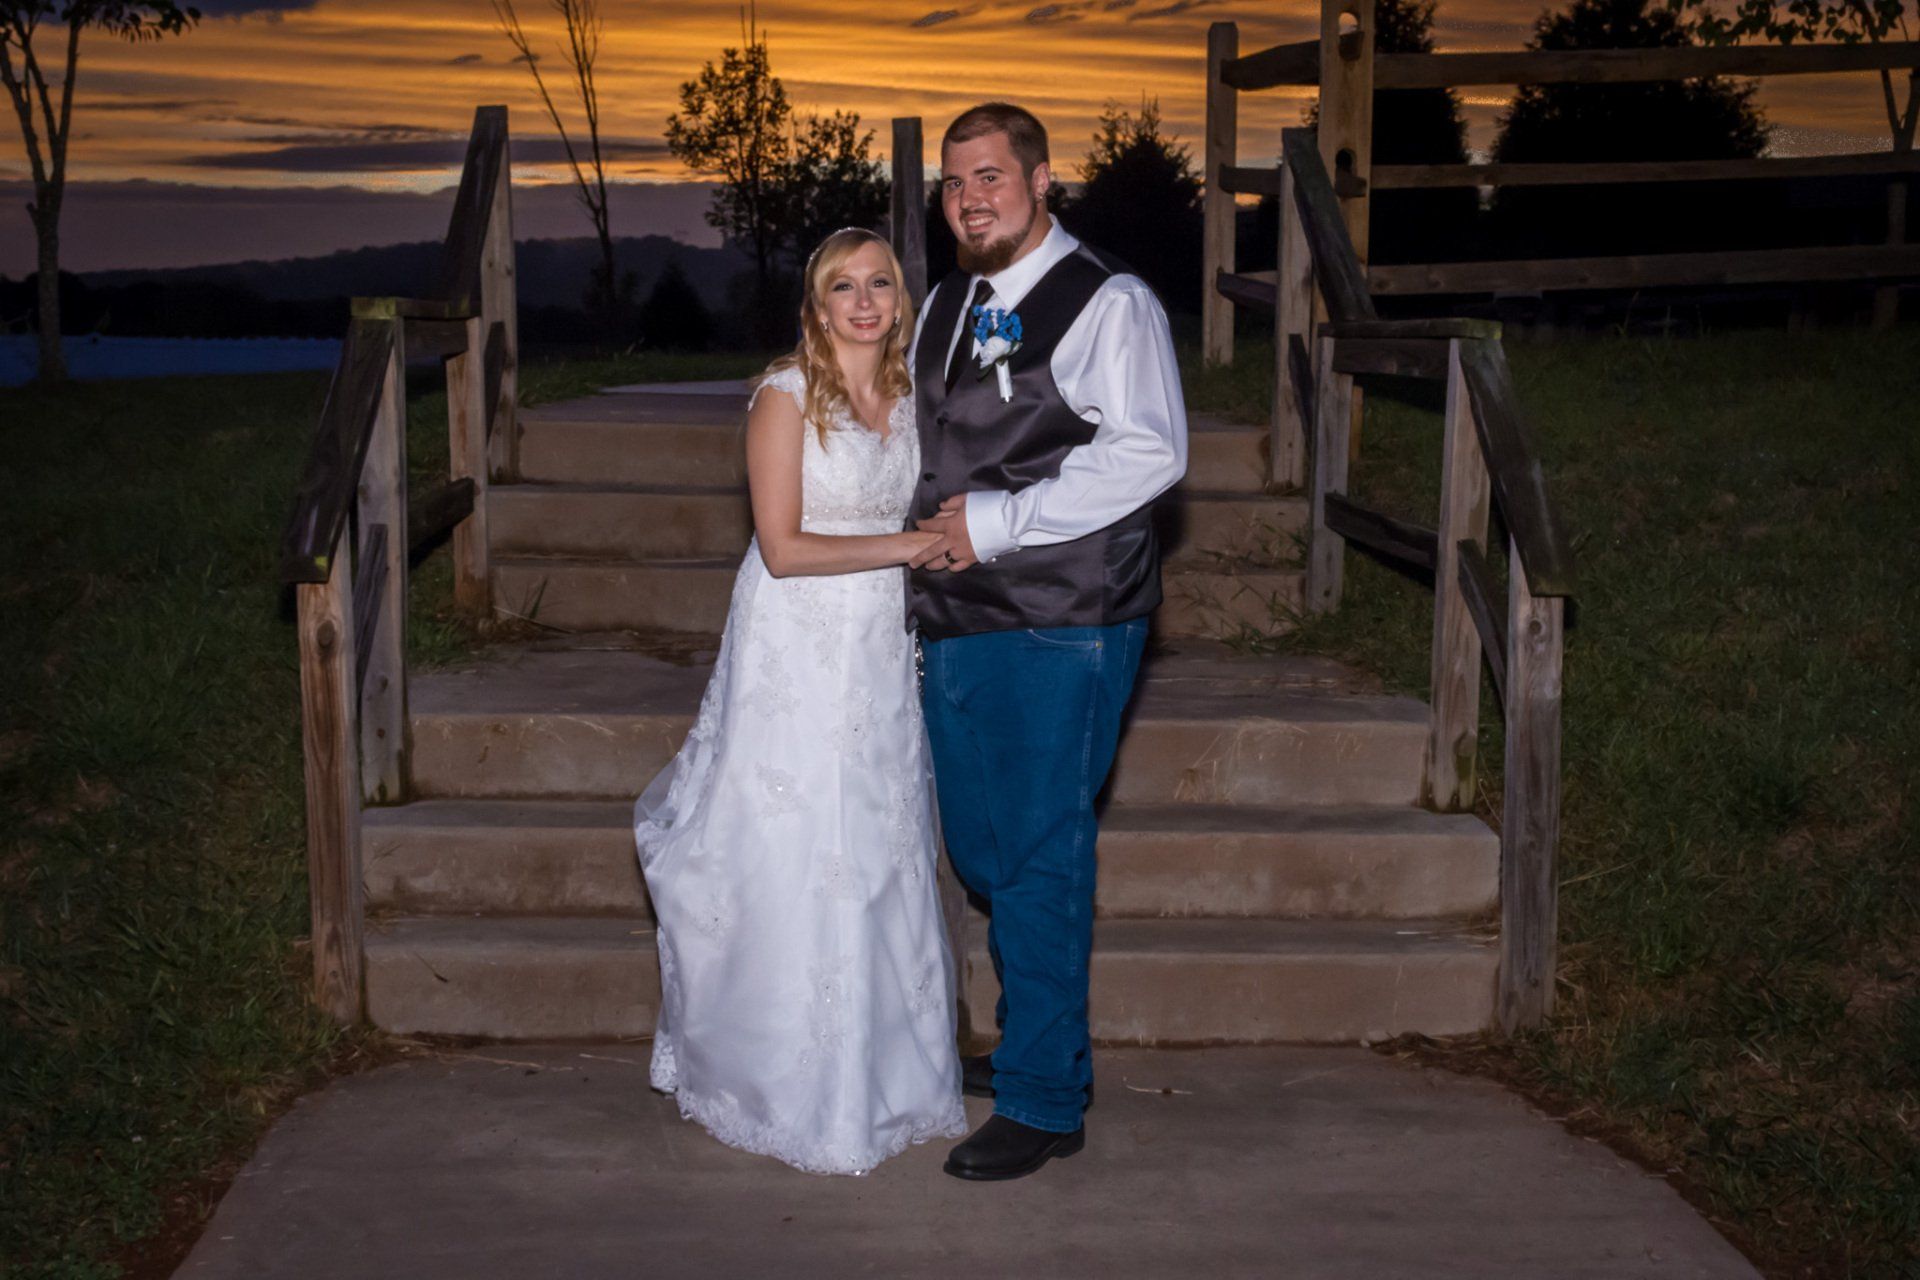 A sunset portrait of a bride and groom with a stairway and orange sunset behind them